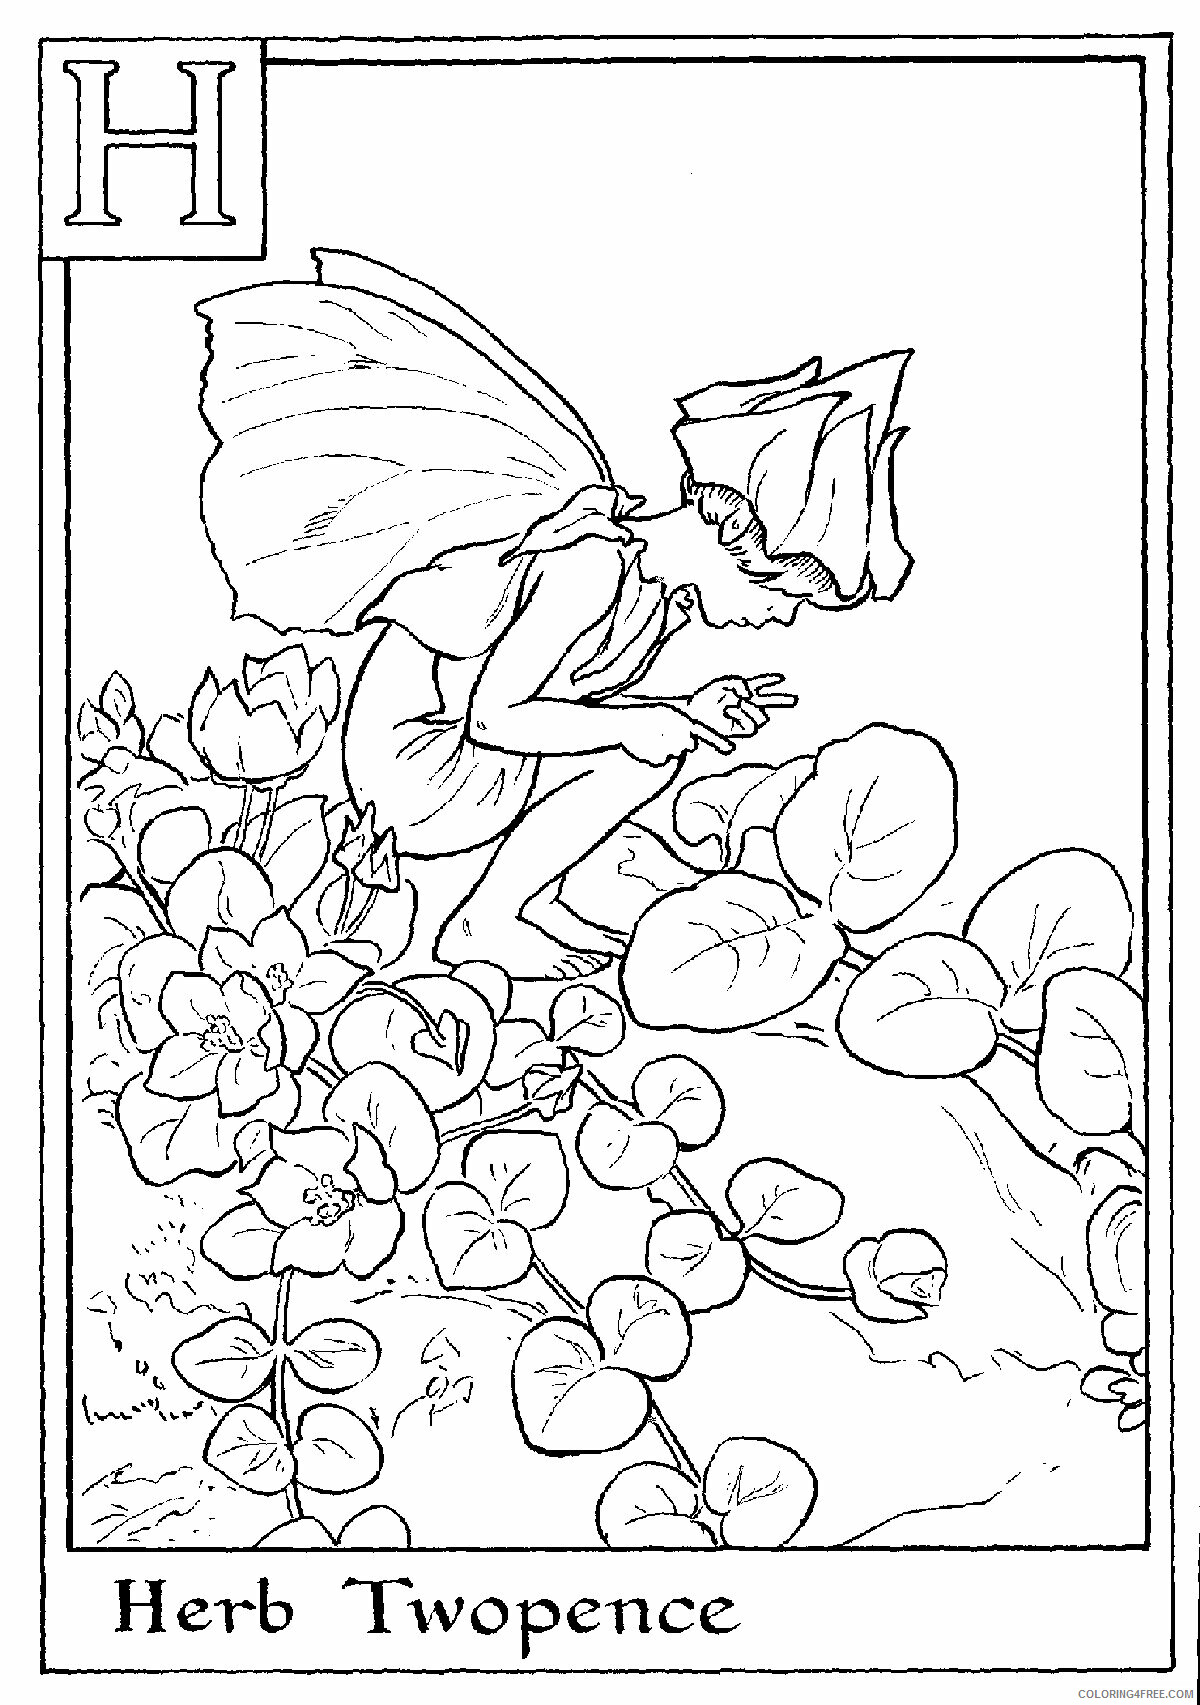 Alphabet Fairies Coloring Pages Printable Sheets flower fairies Free 2021 a 4869 Coloring4free